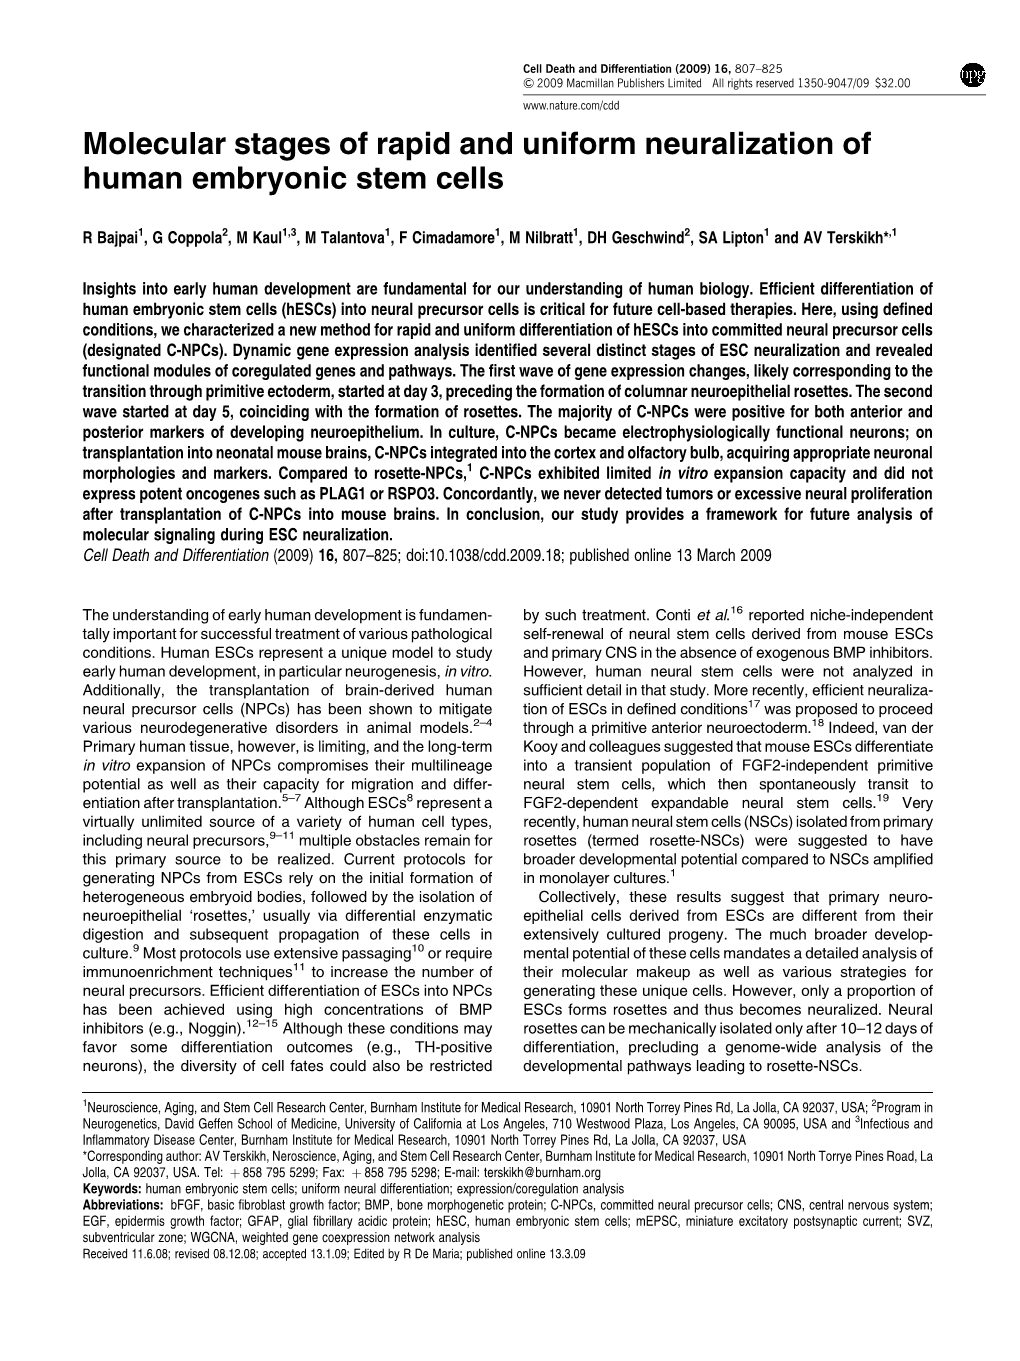 Molecular Stages of Rapid and Uniform Neuralization of Human Embryonic Stem Cells